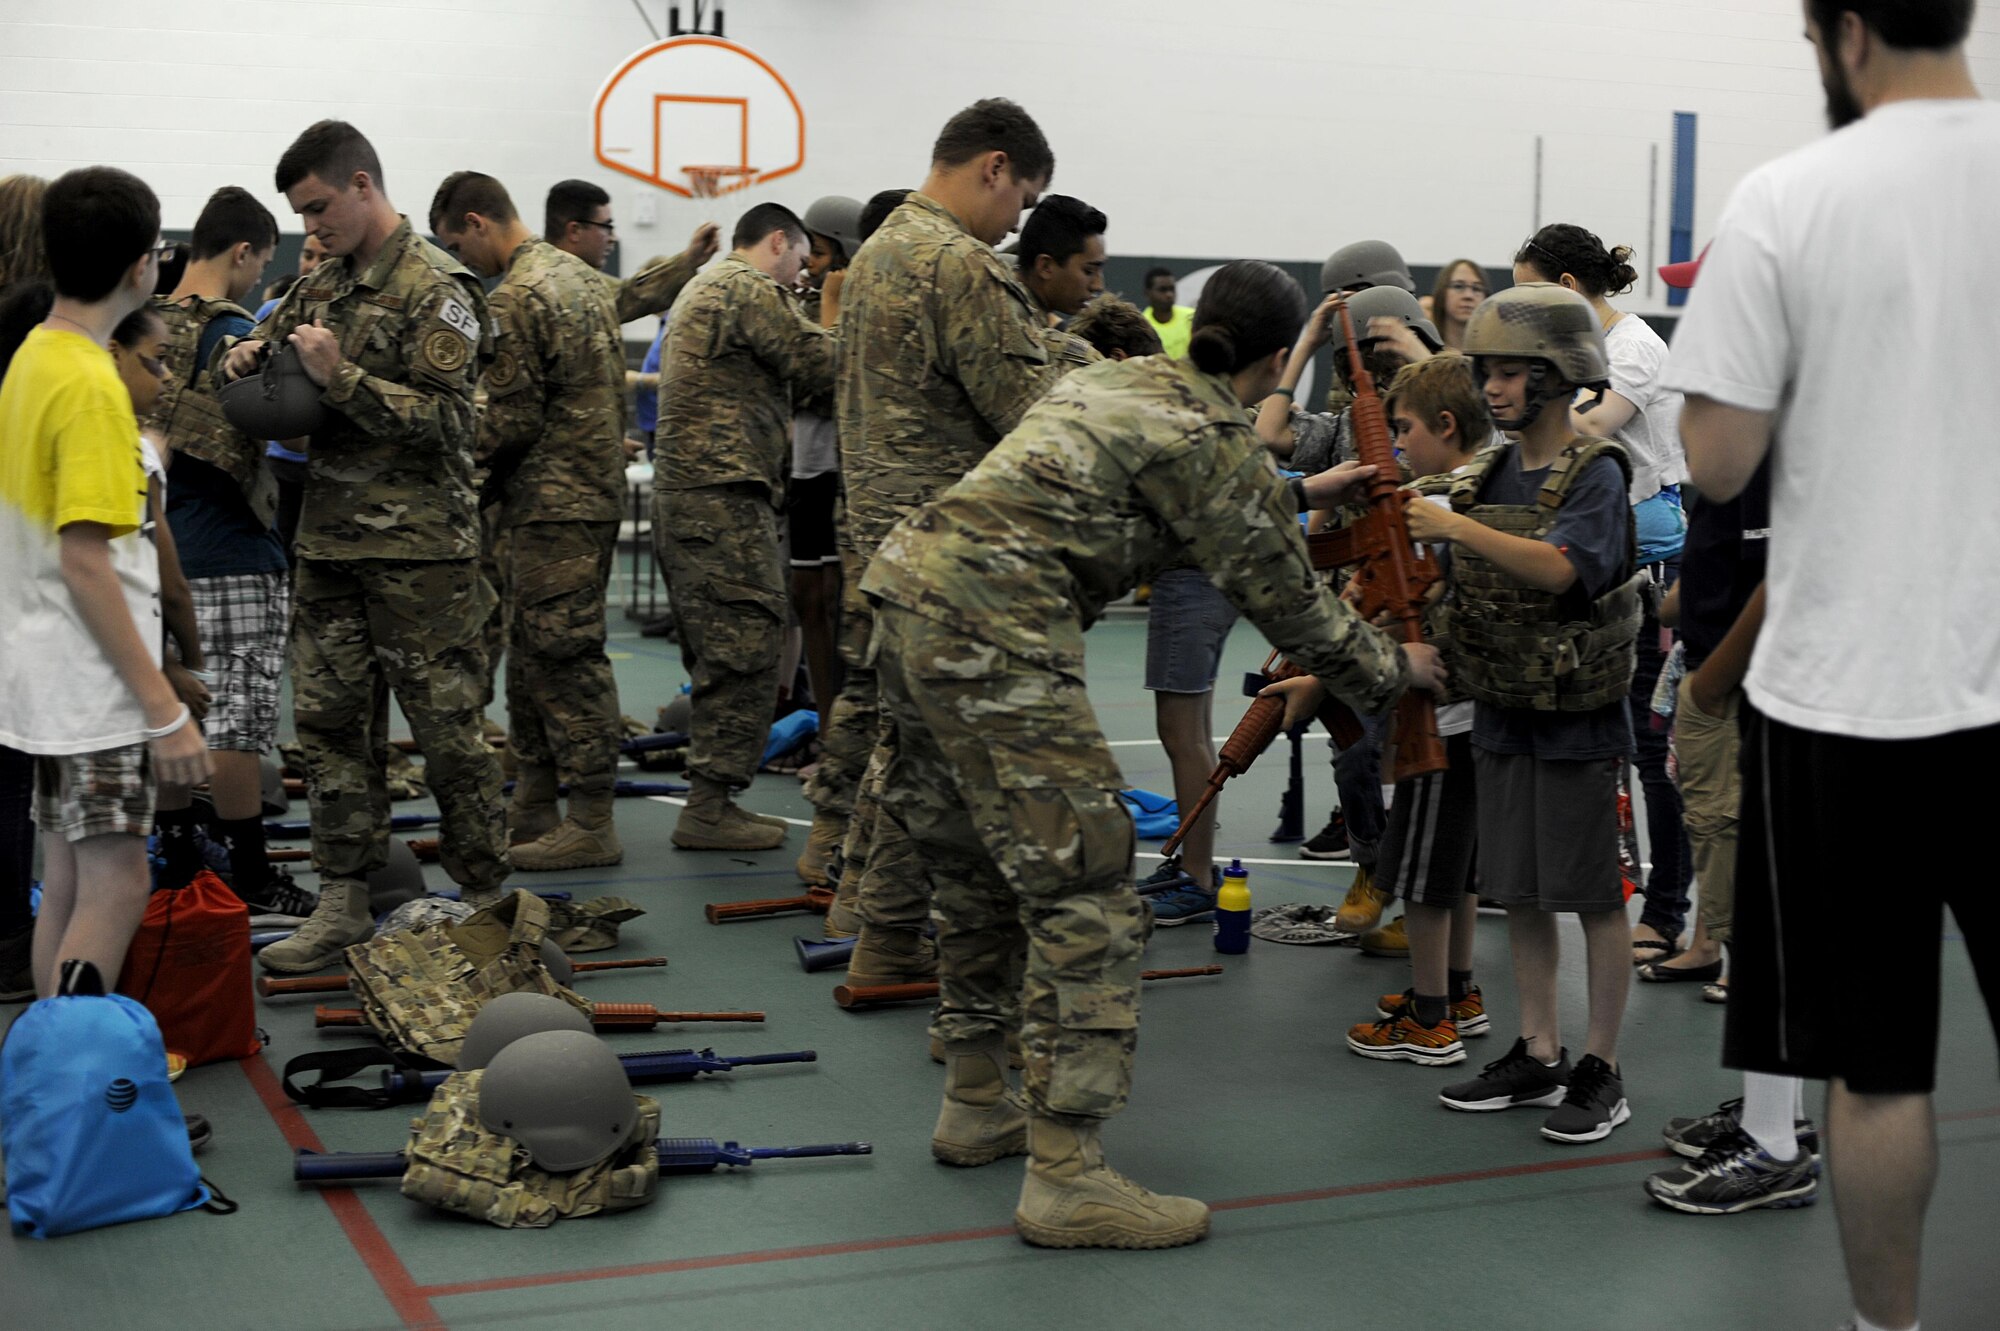 Members from the 791st Missile Security Forces Squadron convoy response force help children gear up at Operation Heroes at Minot Air Force Base, N.D., June 3, 2017. Operation Heroes is an annual event that also included gear to try on, different weapons displays and a deployment line. (U.S. Air Force Photo by Staff Sgt. Chad Trujillo)